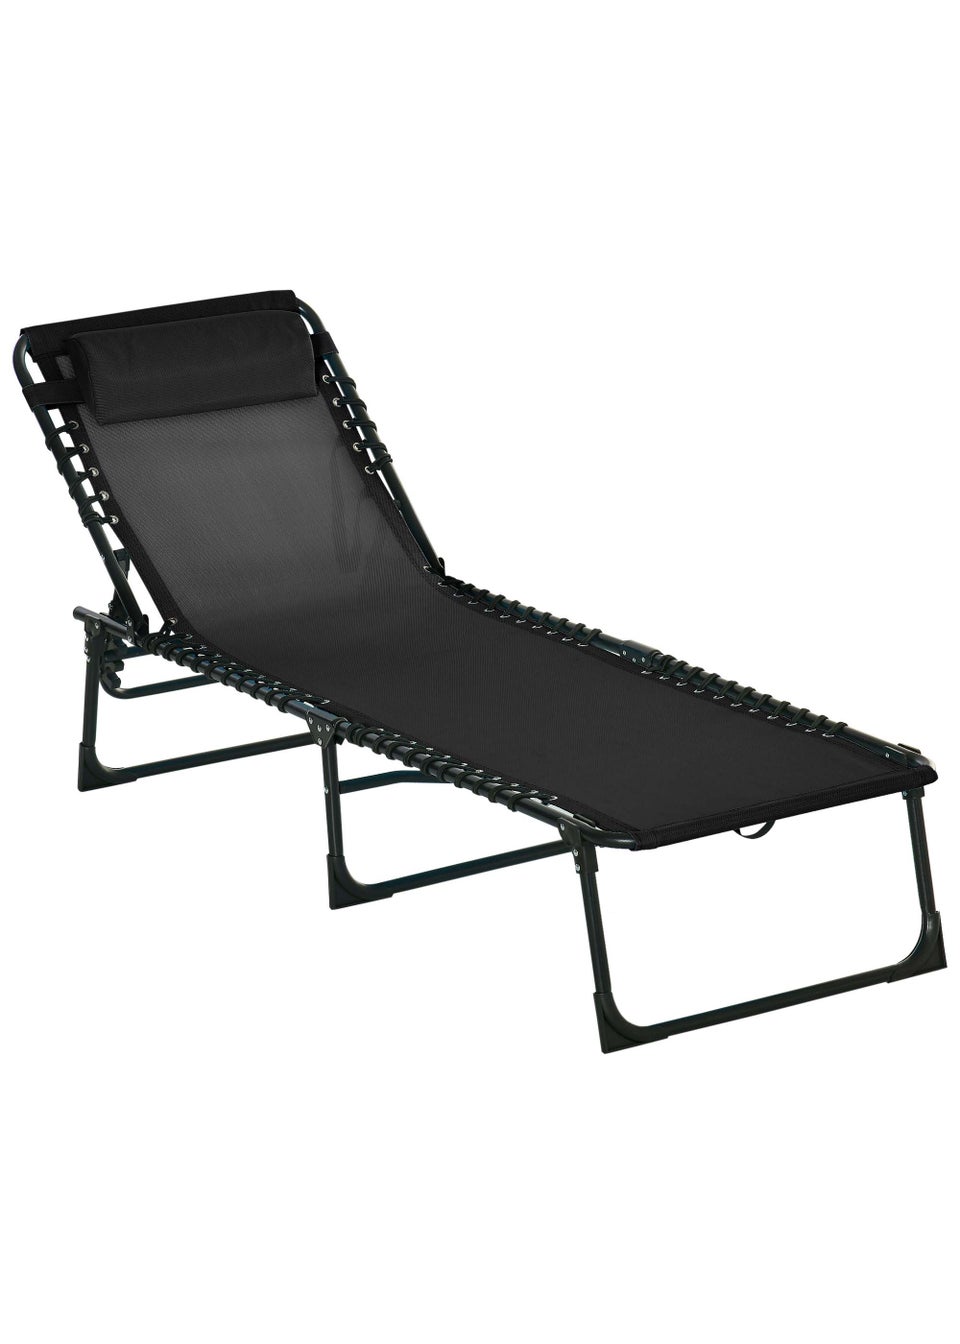 Outsunny Foldable Sun Lounger, Outdoor 4 Level Adjustable Backrest Reclining Chaise Chair